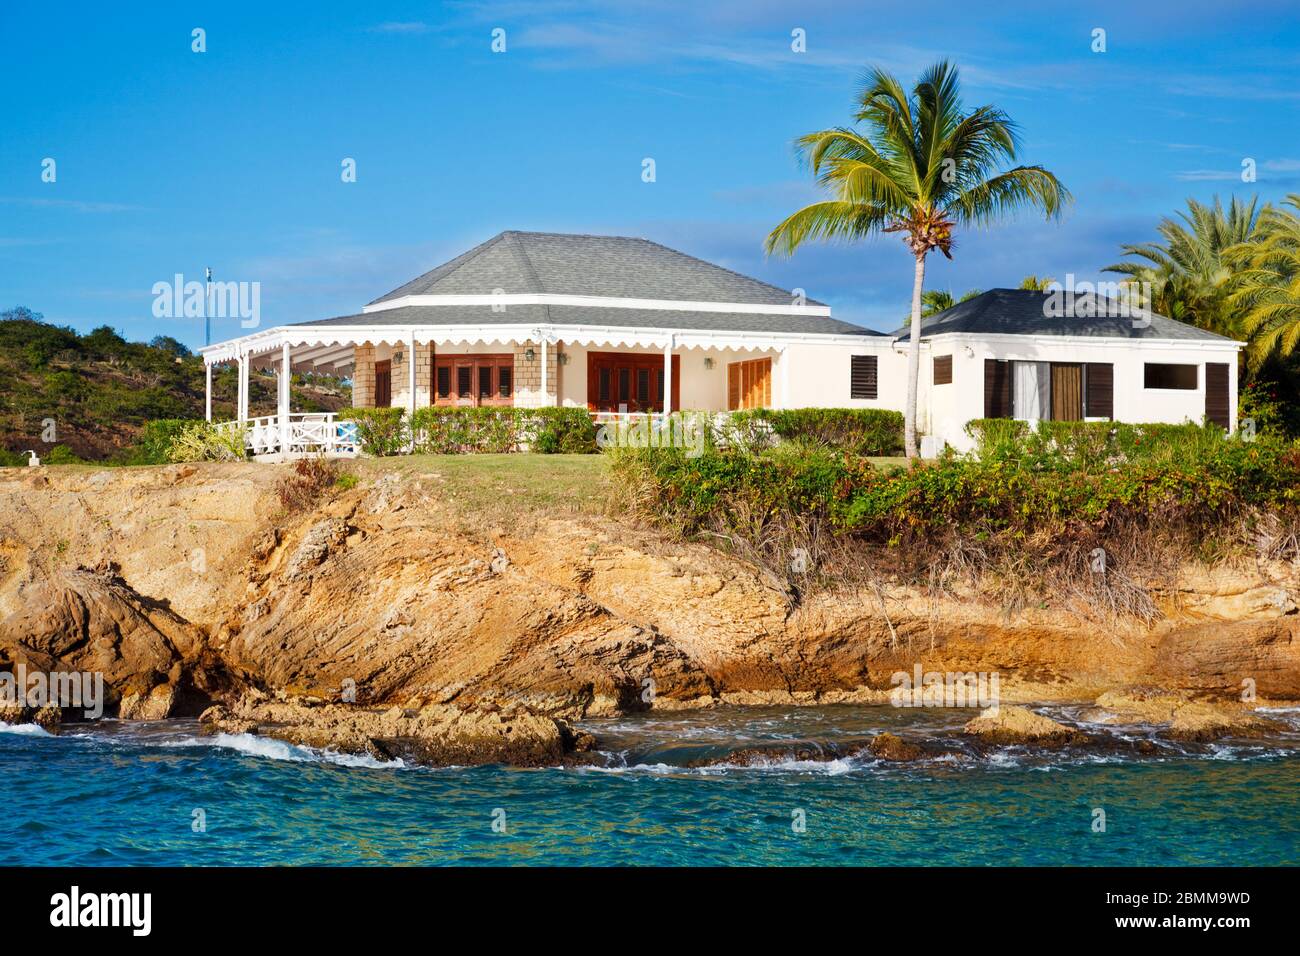 A little caribbean villa on a small cliff with a coconut palm tree. Stock Photo